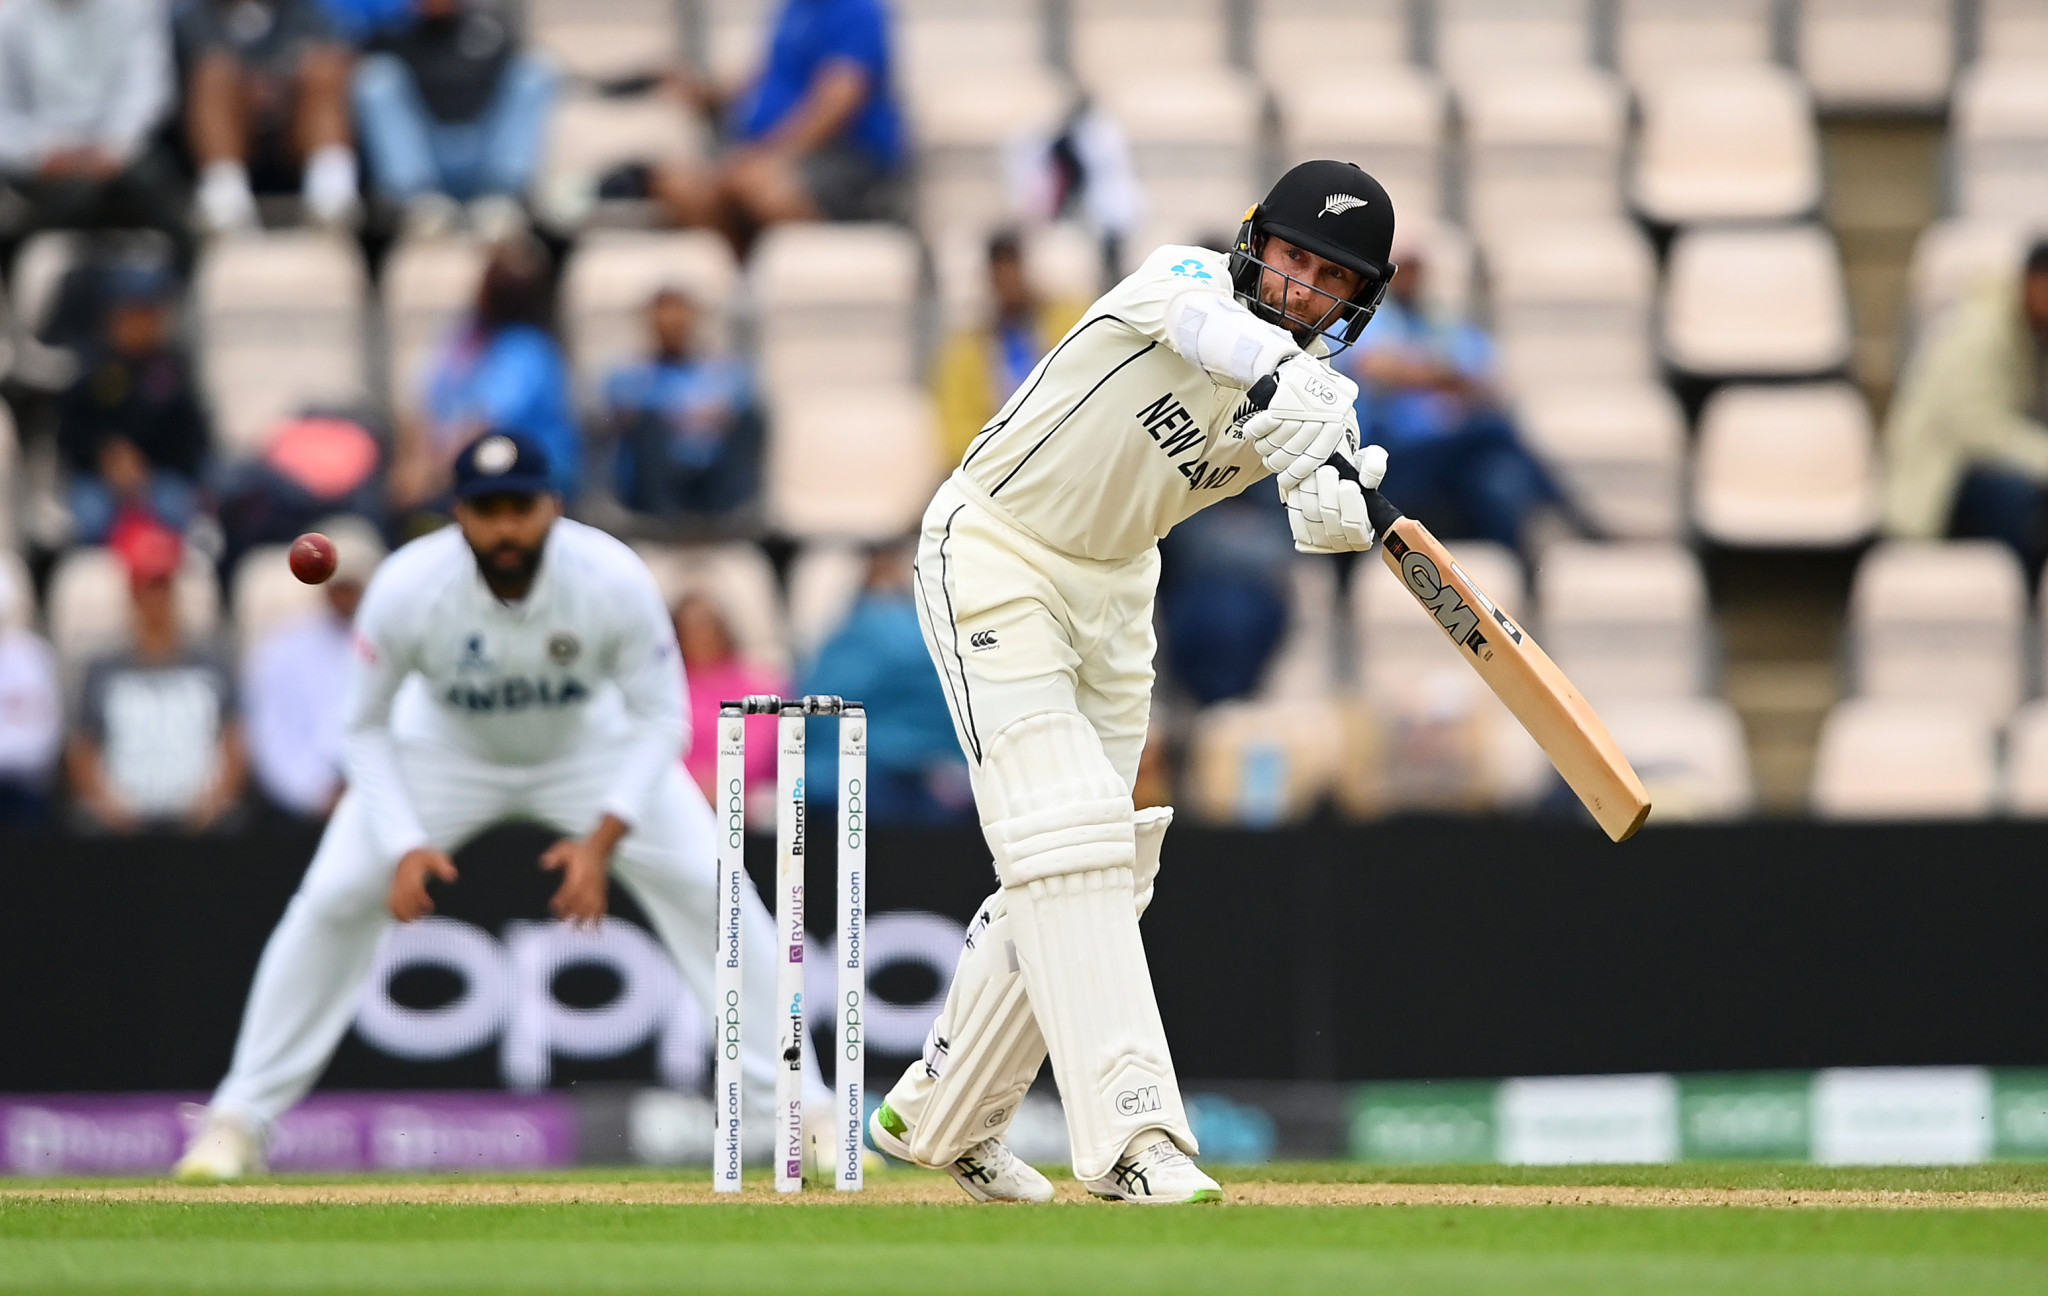 Devon Conway, who was dismissed for 54, helped New Zealand into a strong position at the end of the third day of the World Test Championship final ©Getty Images